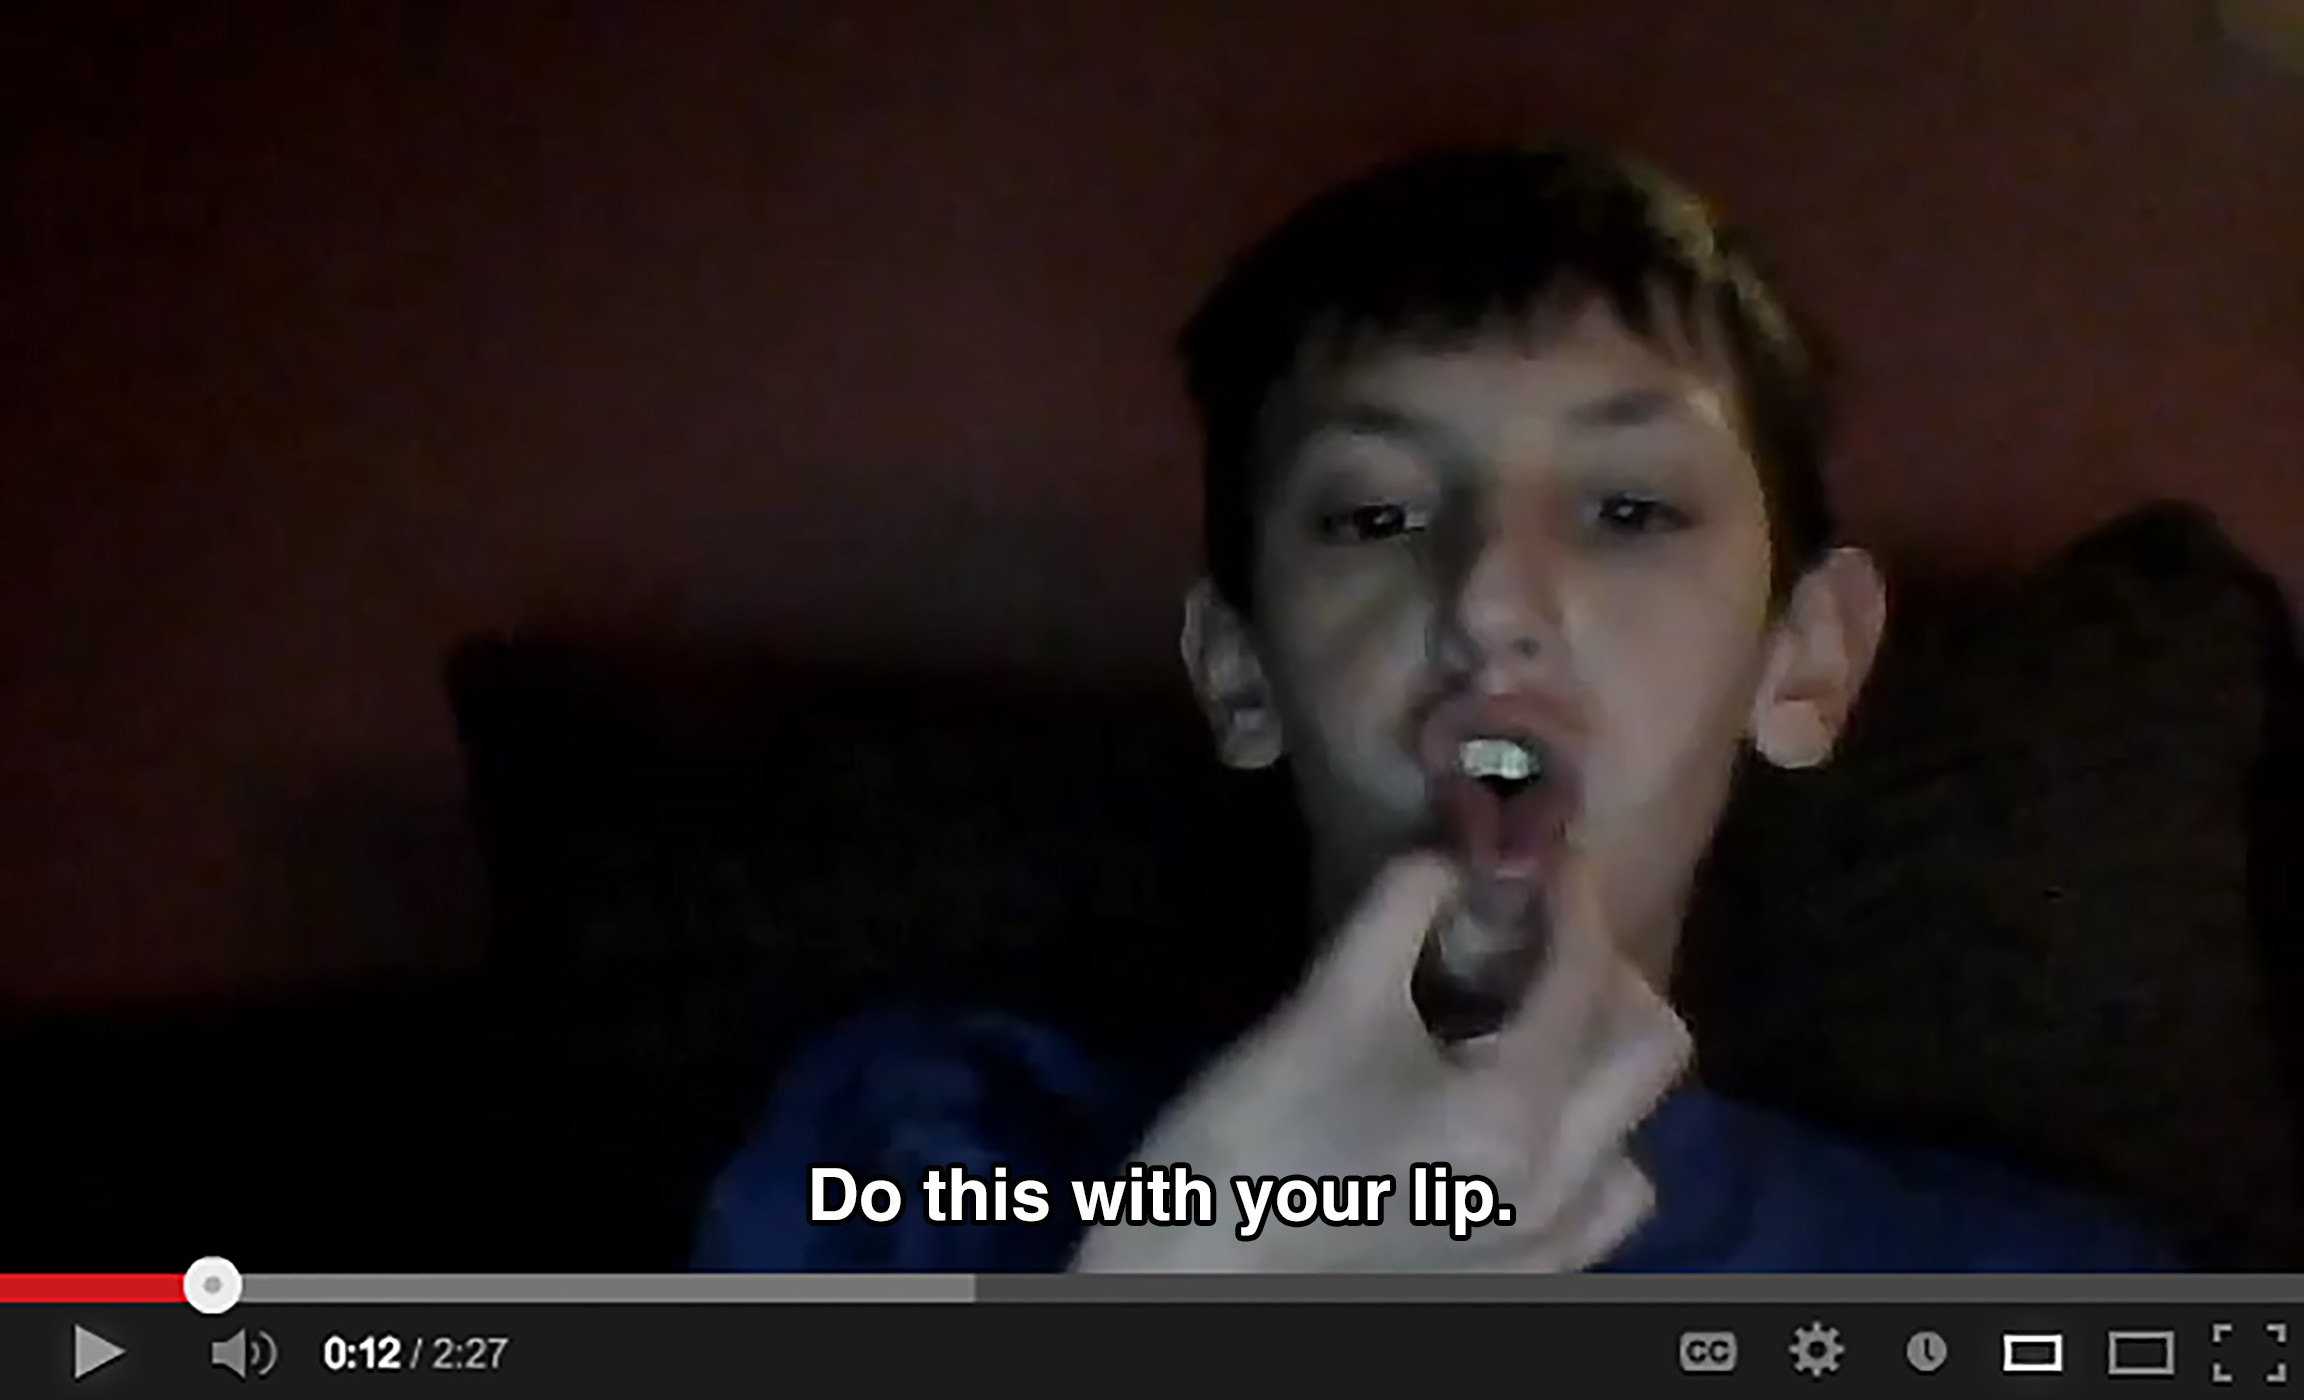 A boy in a dark room pulls his bottom lip downward and squishes it together, saying: Do this with your lip.